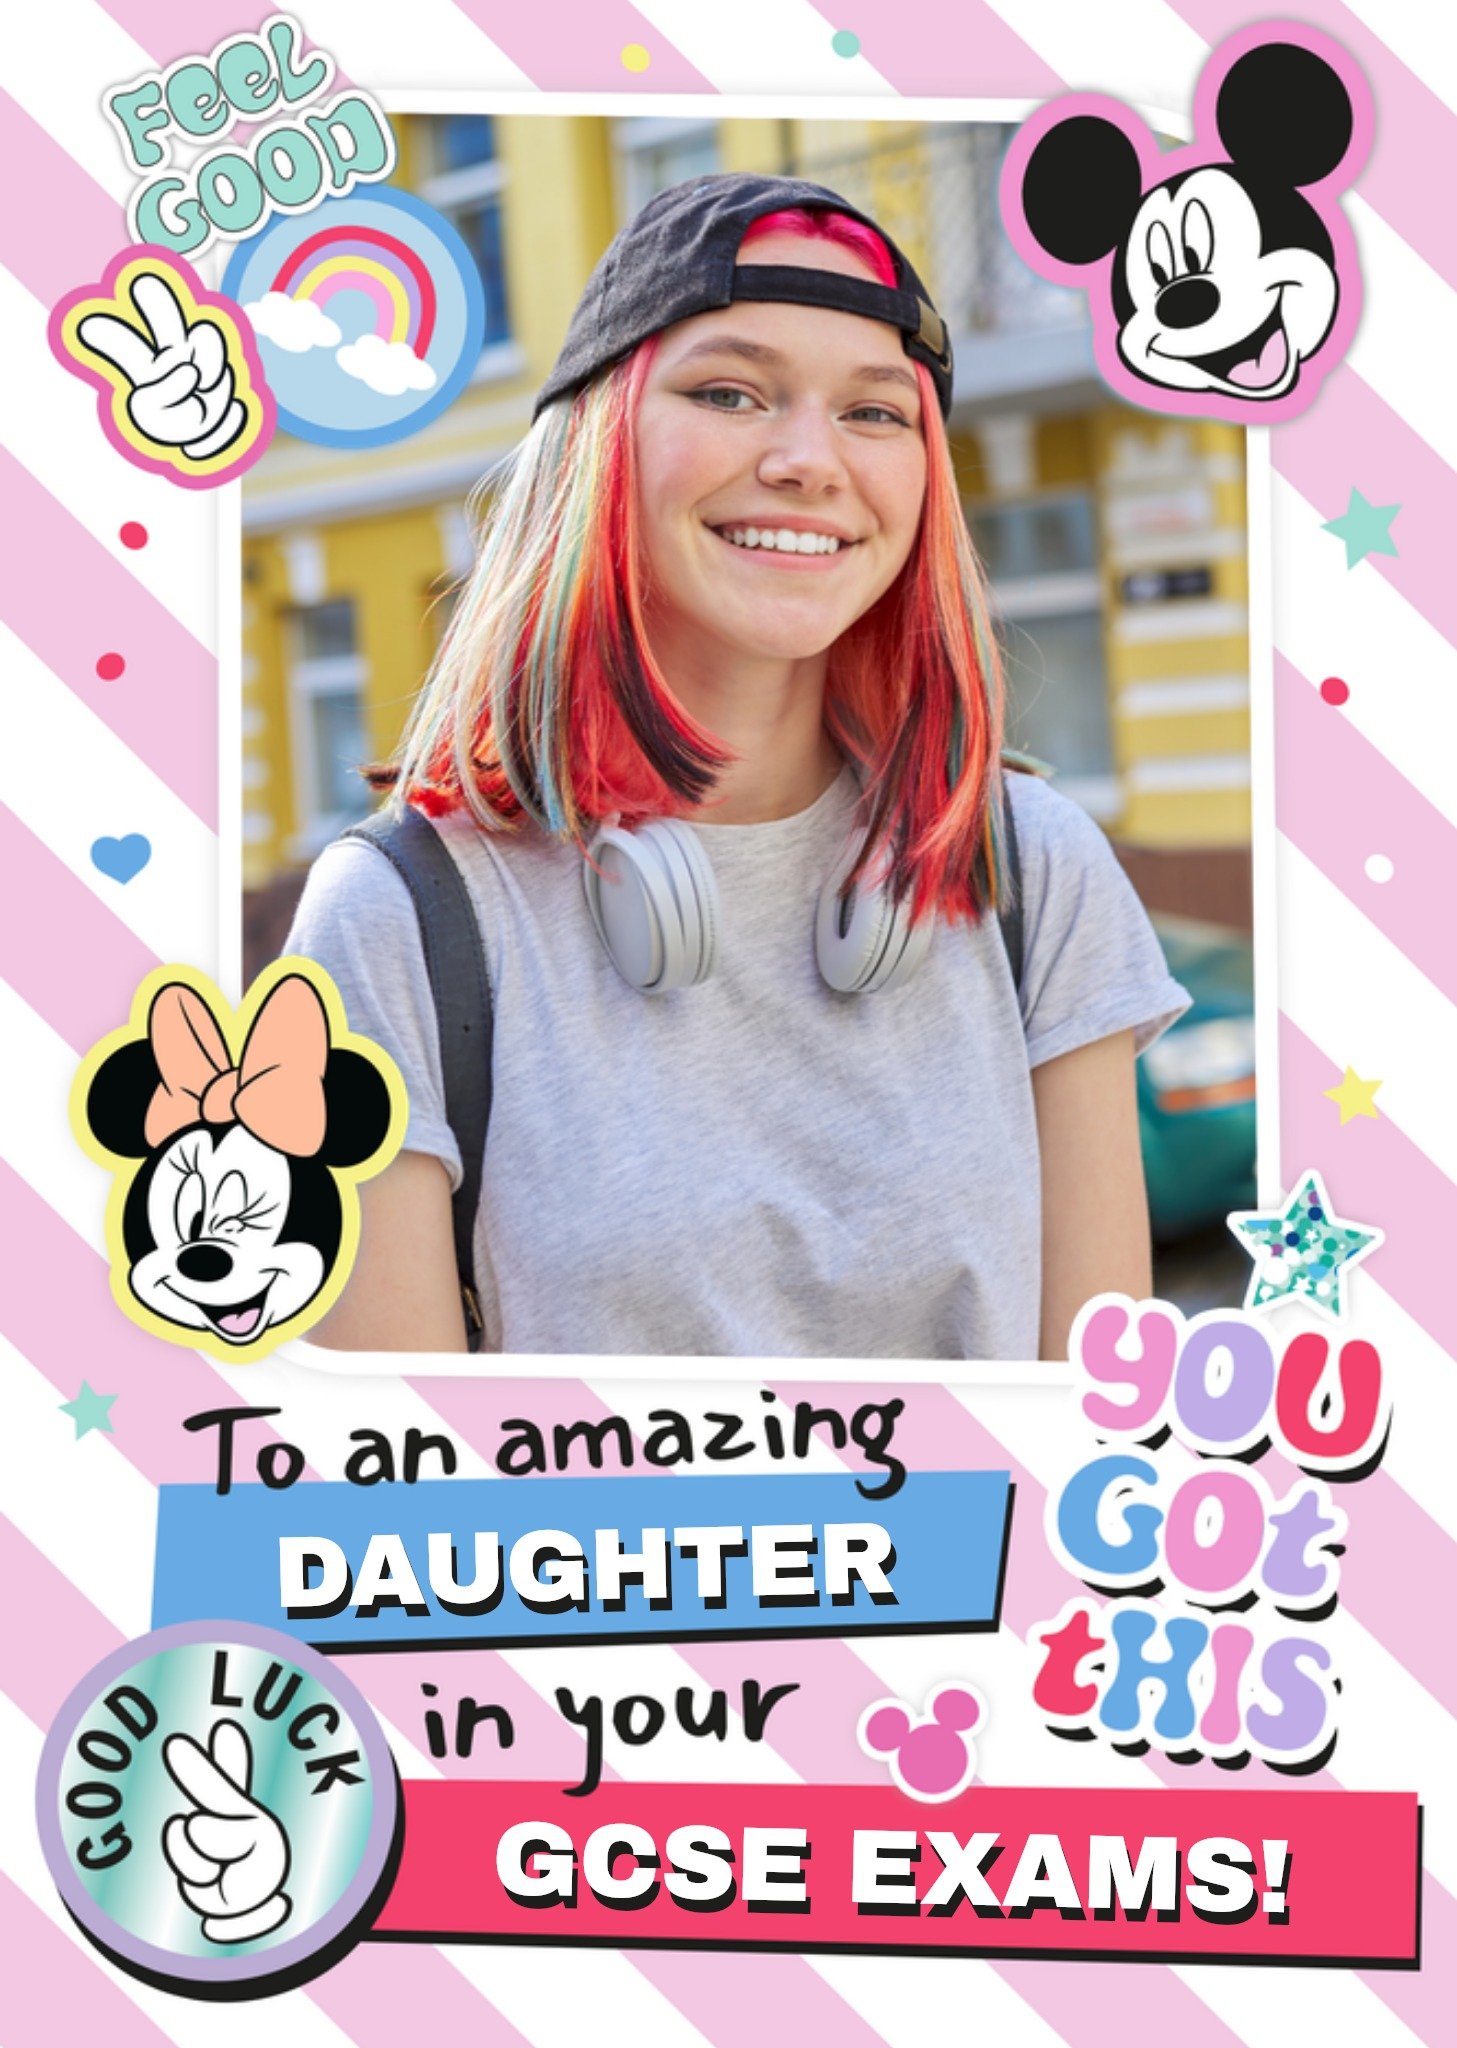 Disney Mickey Mouse To An Amazing Daughter You Got This Photo Upload Exams Good Luck Card, Large